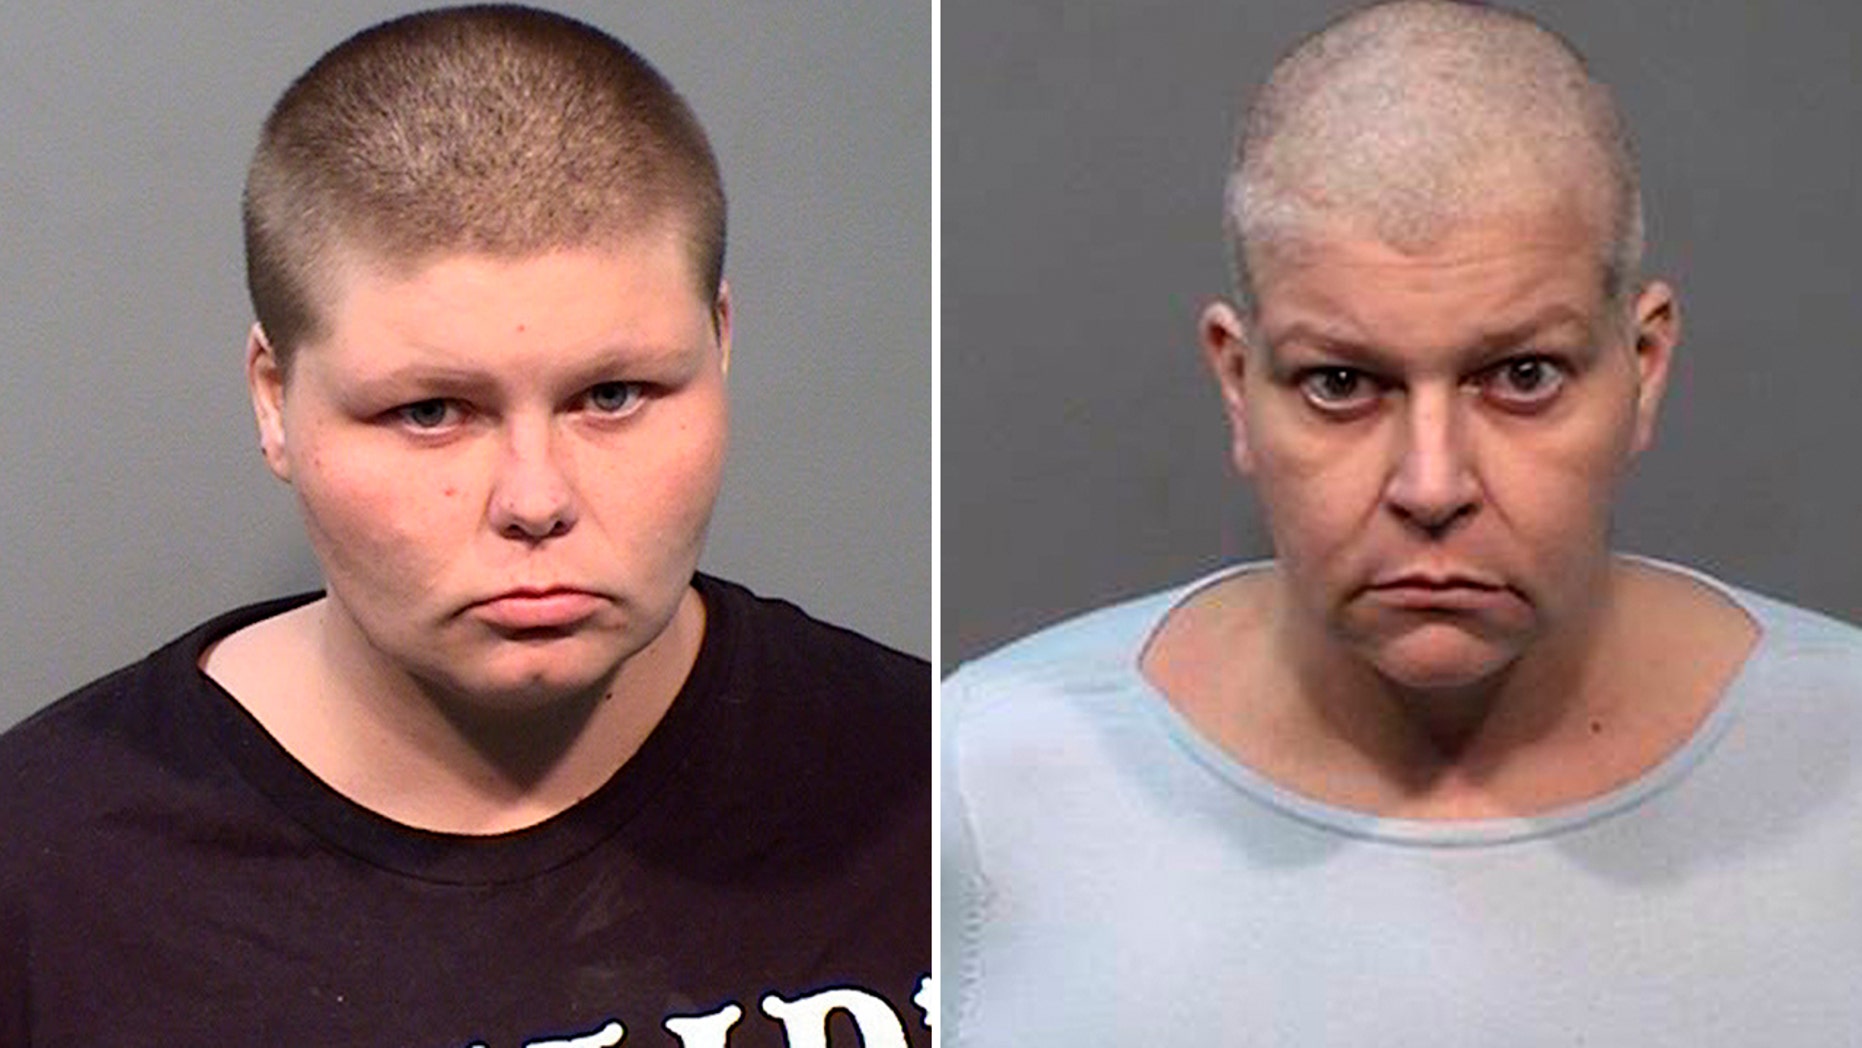 Tara Aven, 46, left, and Briar Aven, 24, right, were arrested Tuesday for allegedly killing the family's grandmother nand cashing her monthly checks, police said.